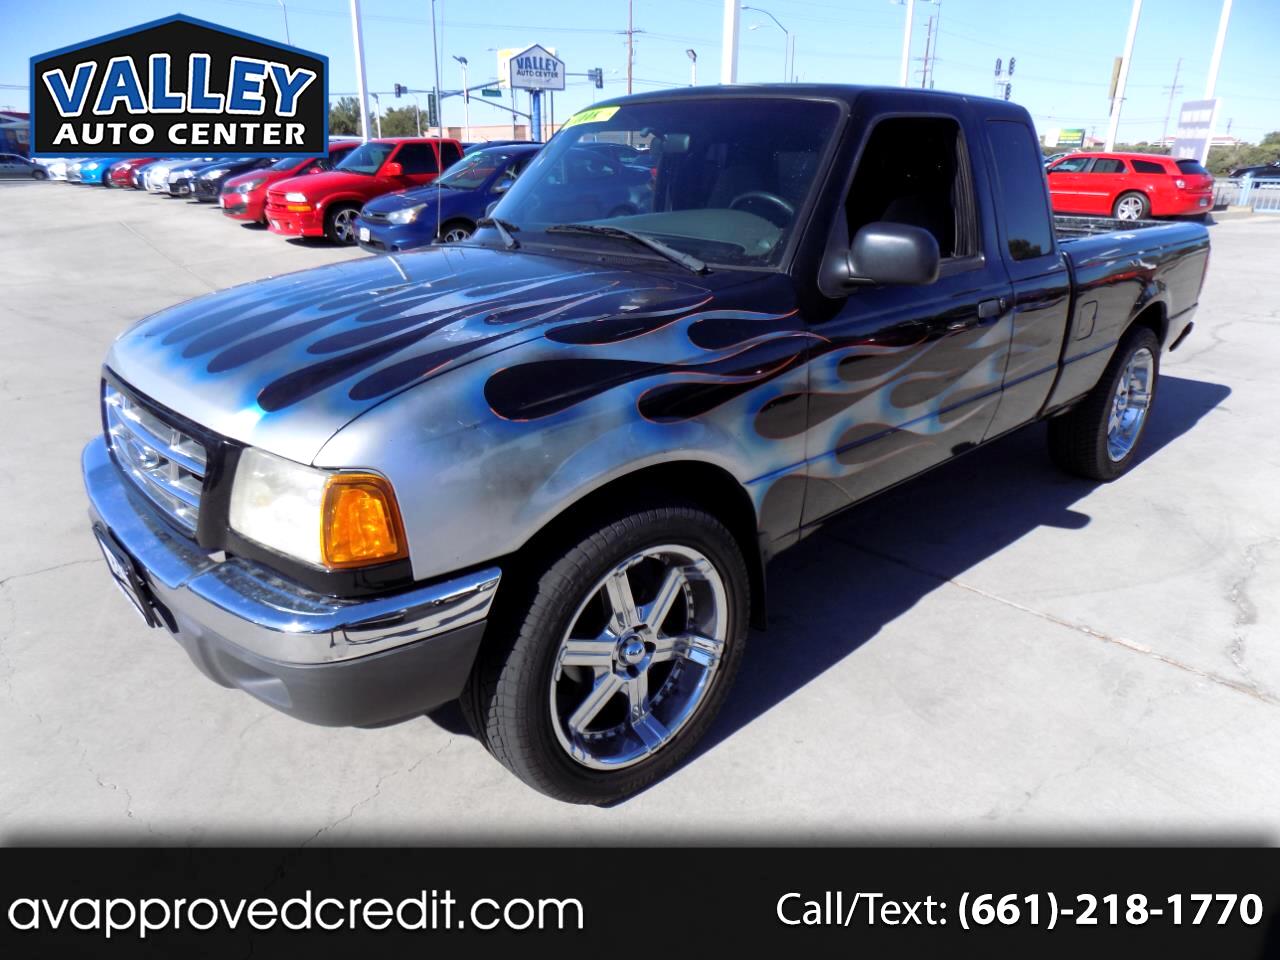 Used 2001 Ford Ranger Xlt Supercab 3 0 2wd For Sale In